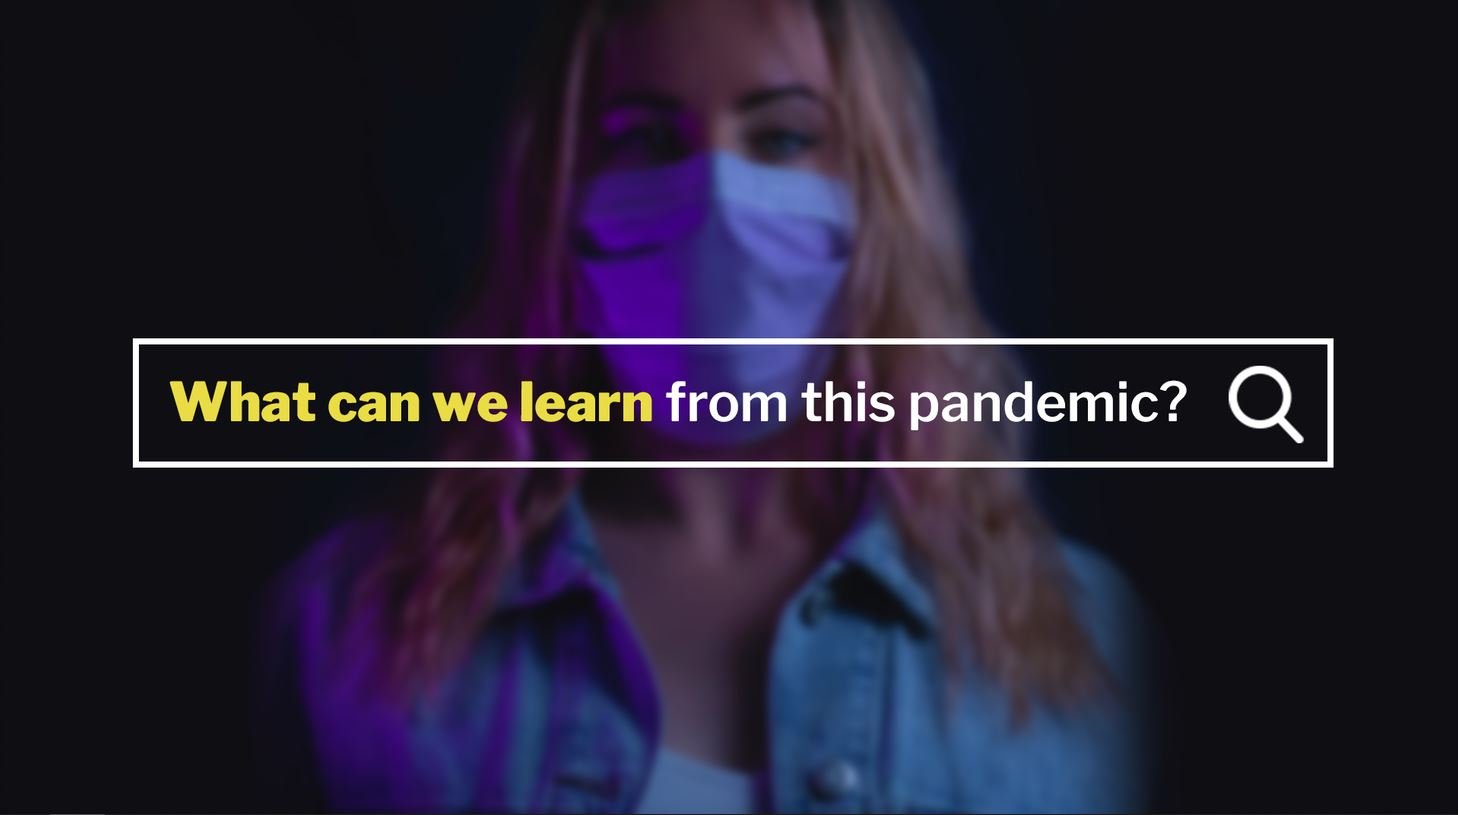 What Can we Learn From This Pandemic About Science and Nature?